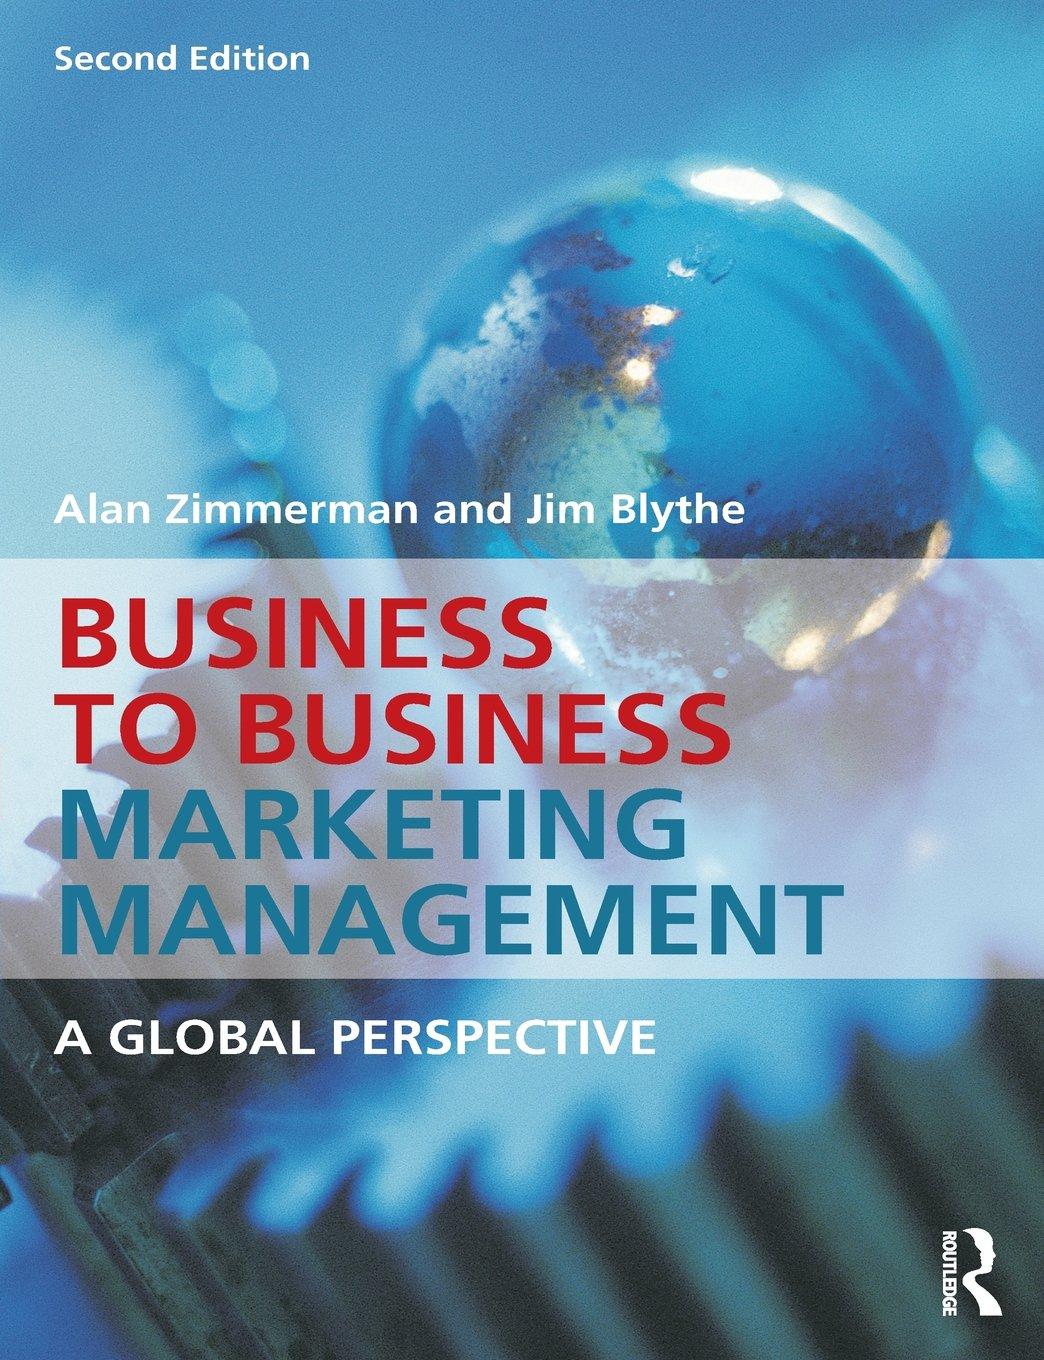 business to business marketing management a global perspective 2nd edition alan zimmerman, jim blythe